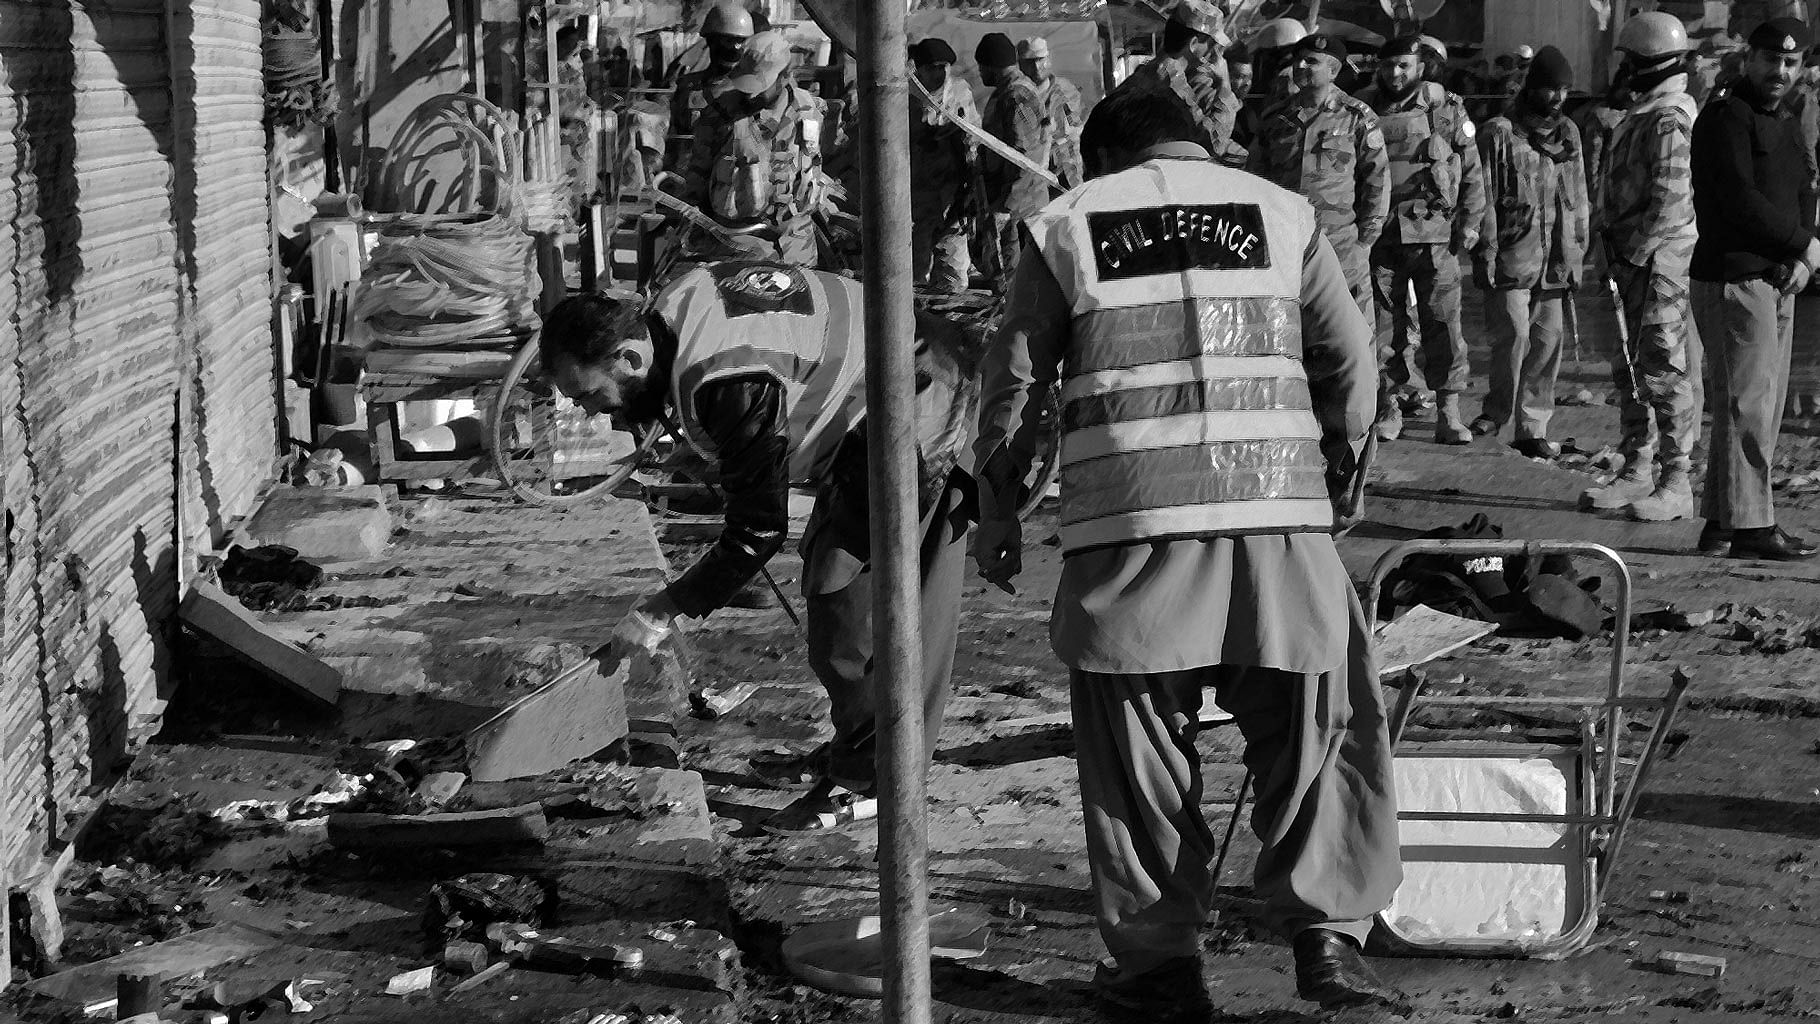 Policemen examine a blast site in southwest Pakistan’s Quetta on 13 January 2016. (Photo: IANS/altered by <b>The Quint</b>)